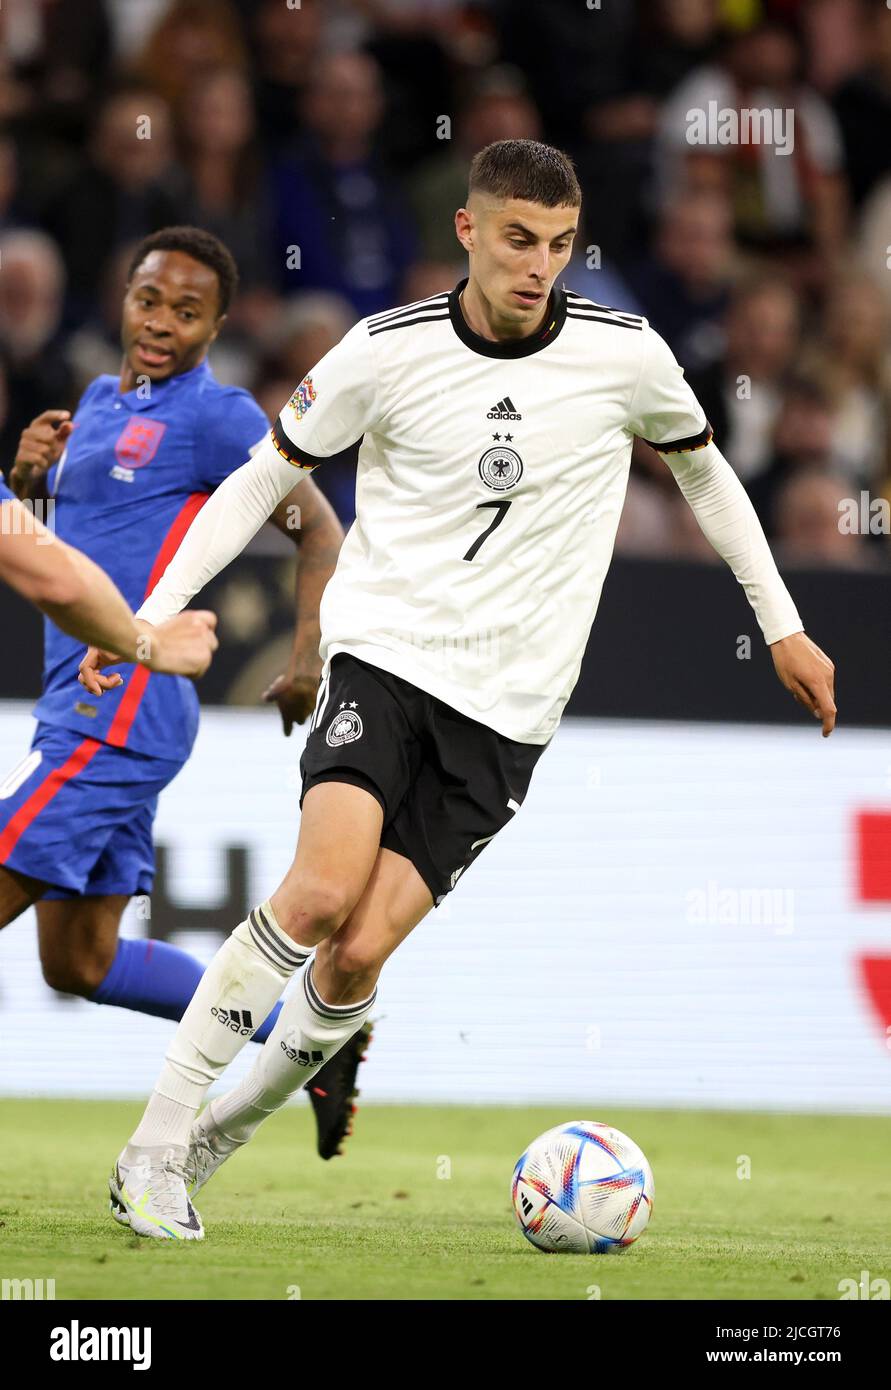 Kai Havertz of germany  MUNICH, GERMANY - JUNE 07:  UEFA Nations League League A Group 3 match between Germany and England at Allianz Arena on June 07, 2022 in Munich, Germany. Nations League Deutschland England  © diebilderwelt / Alamy Stock Stock Photo